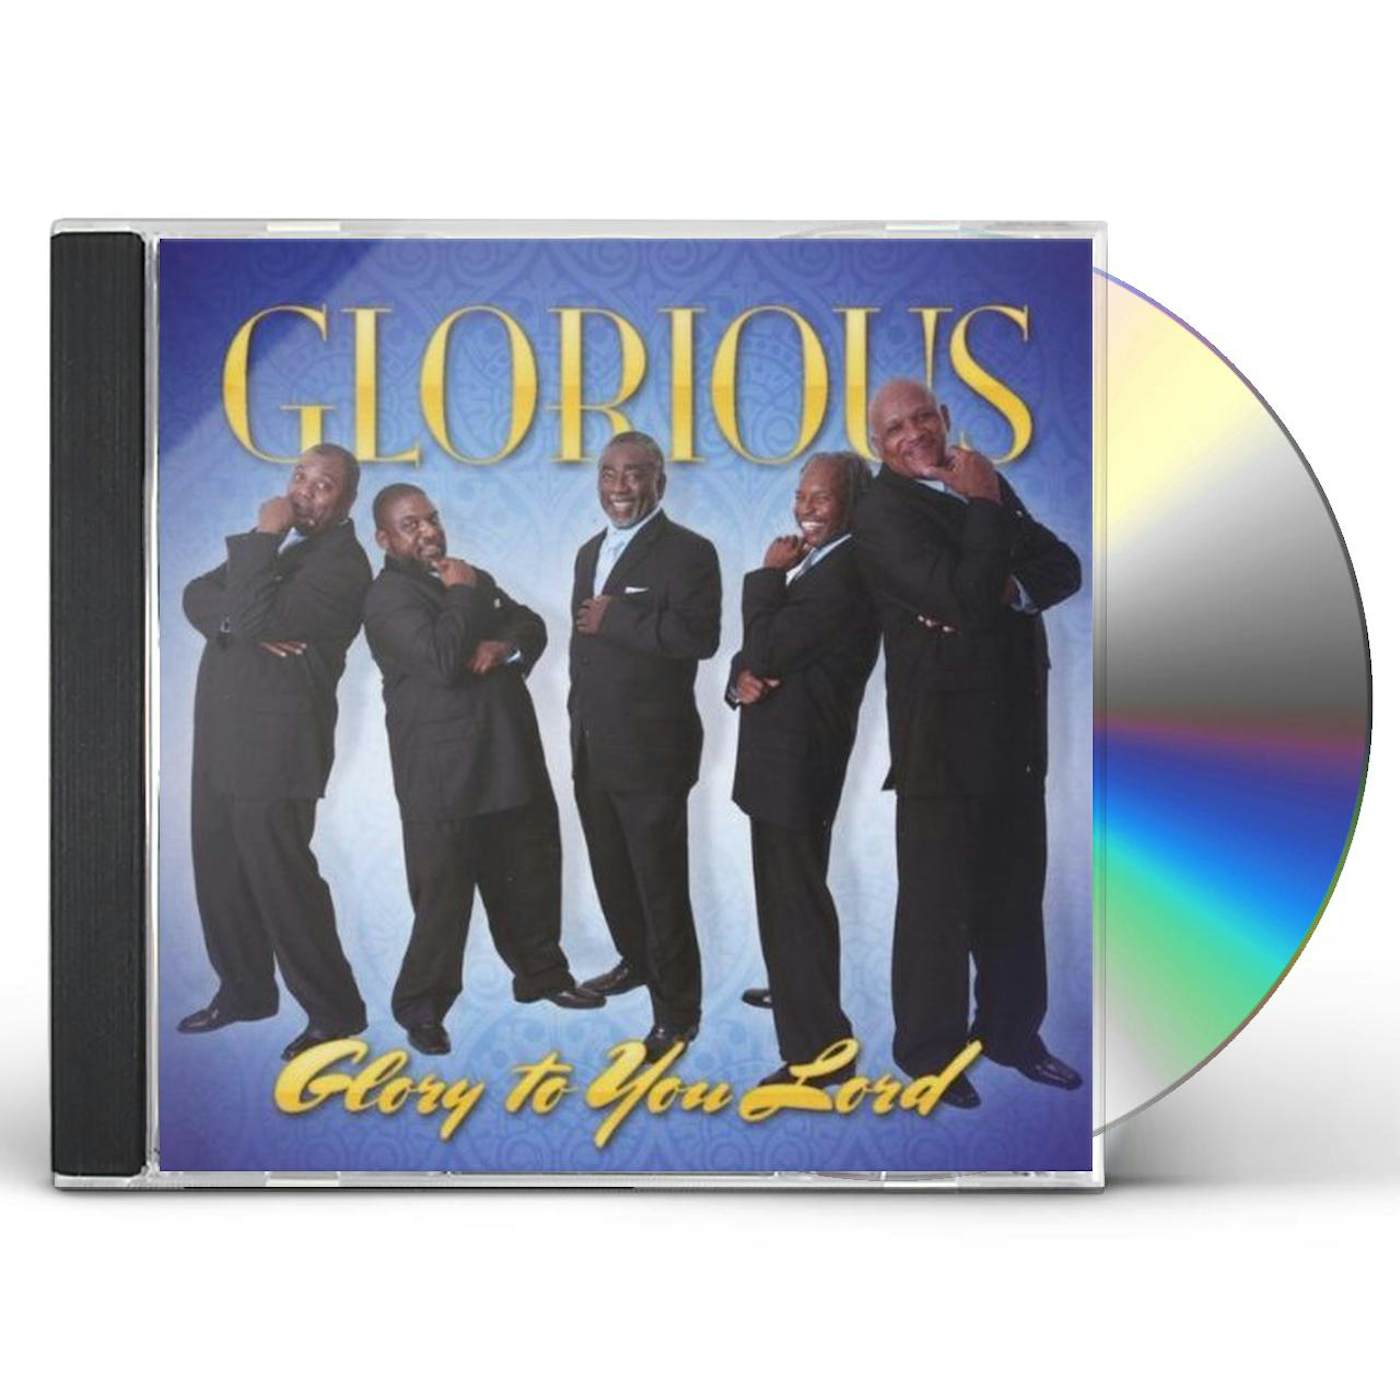 Glorious GLORY TO YOU LORD CD